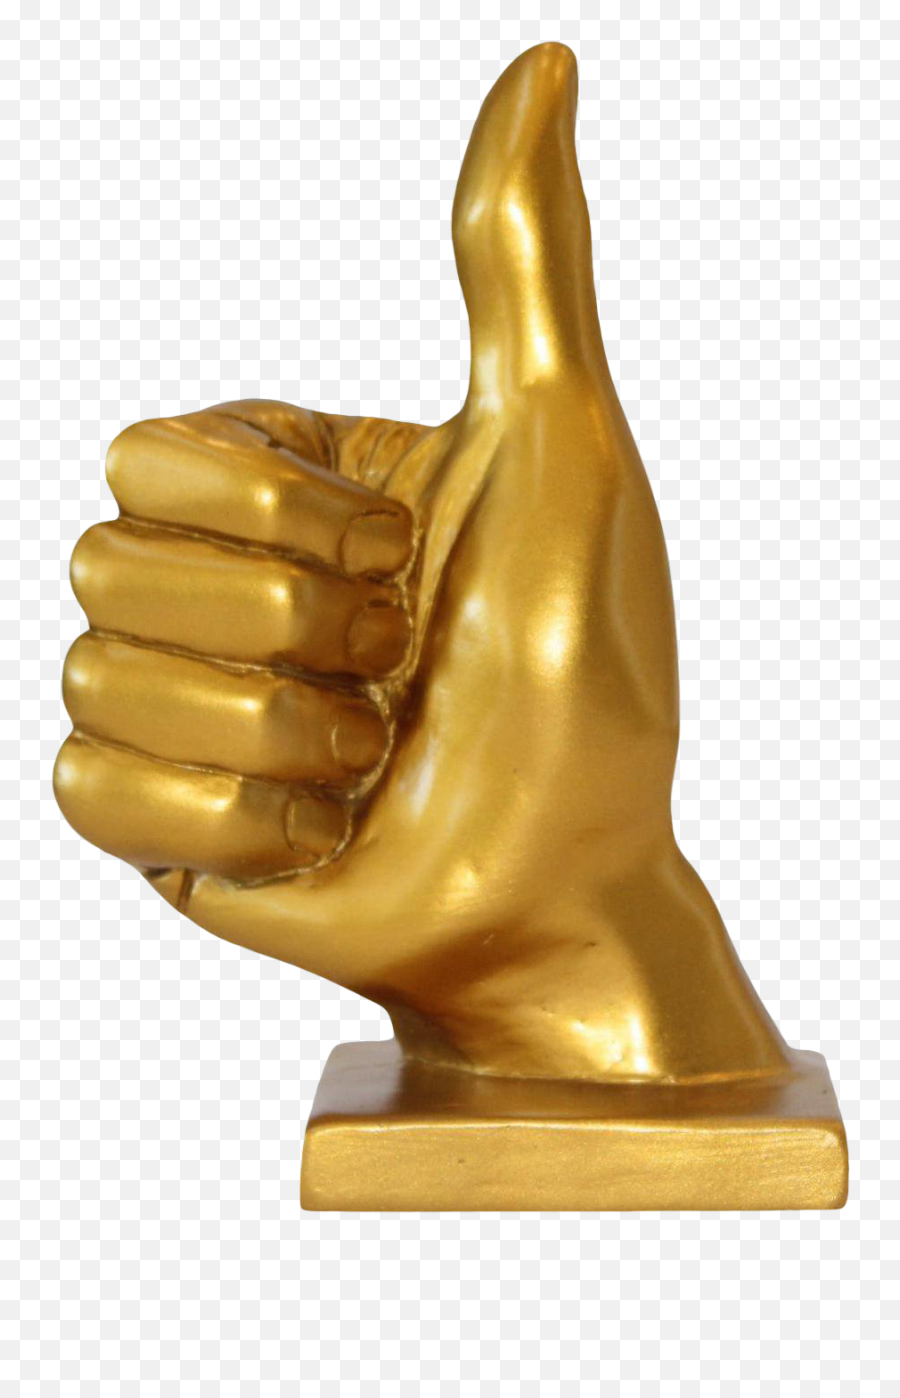 Gold Thumbs Up Hand Symbol Sculpture - Gold Thumb Up Emoji,Text Emoticon From Apple That Has Thumbs Up And An Envelope?